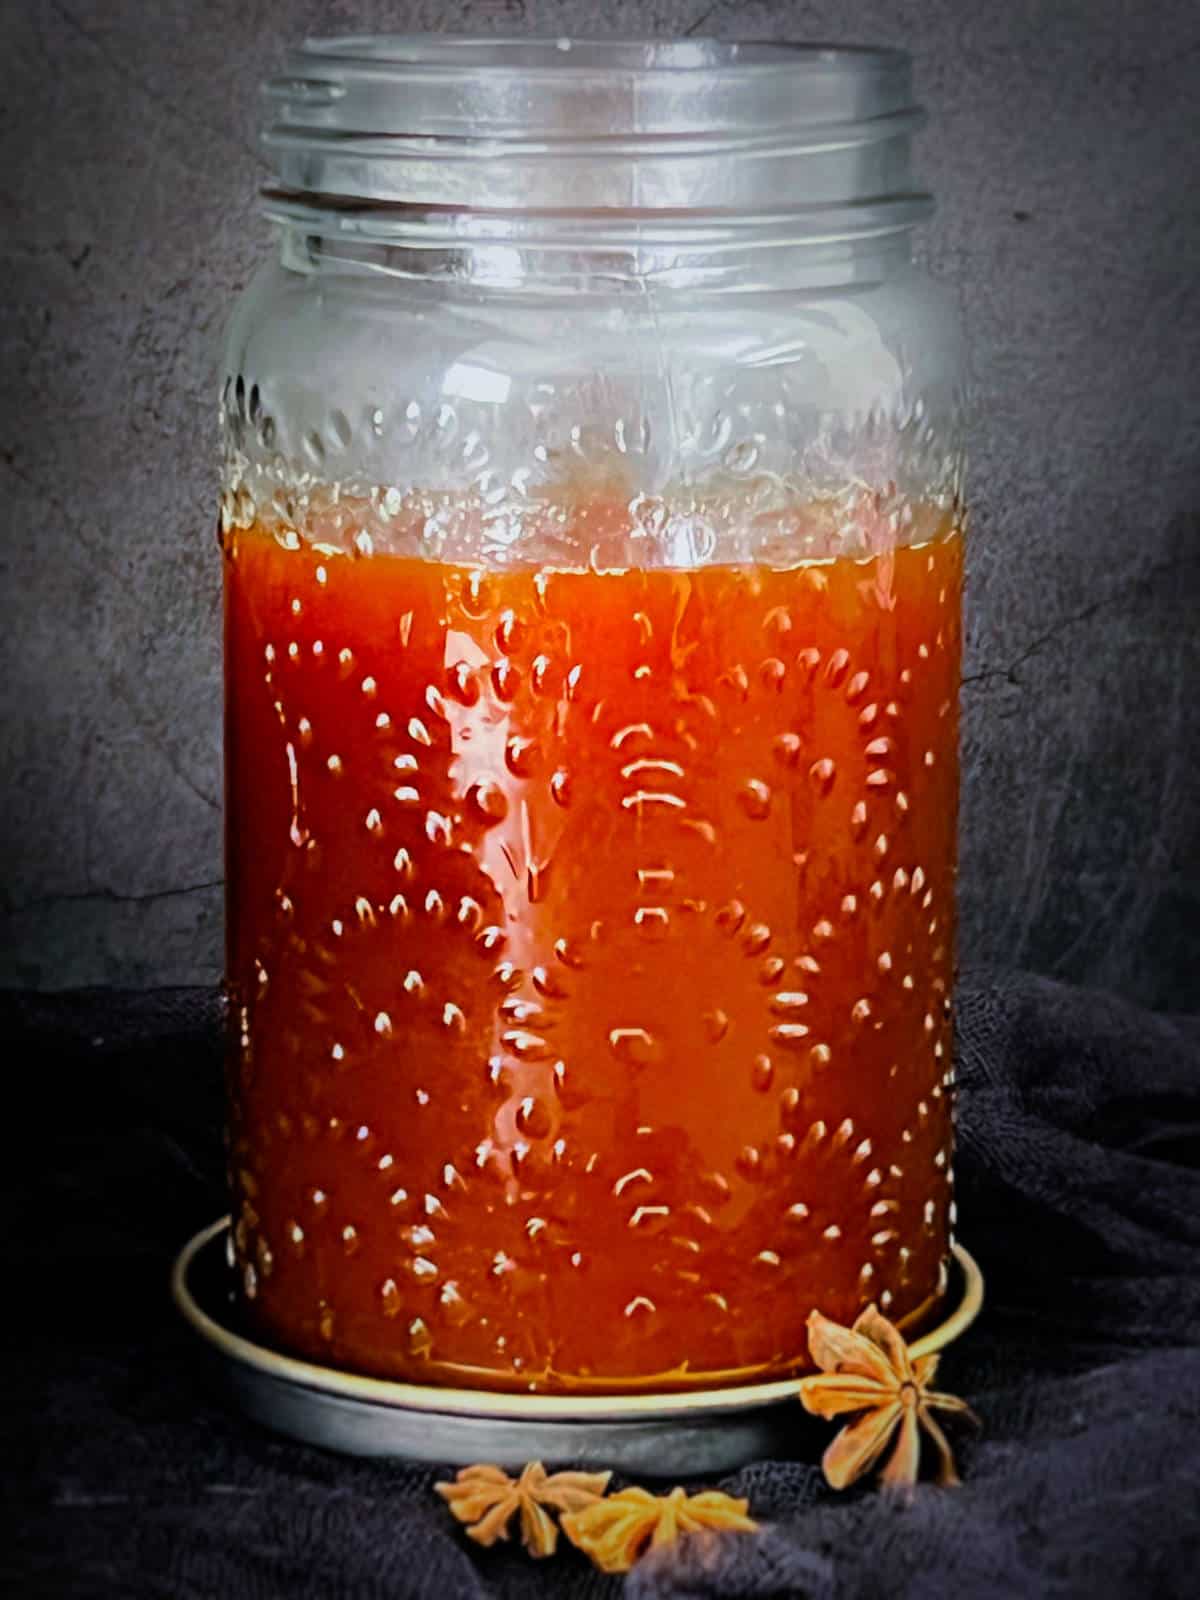 Spiced ginger syrup in a glass jar.